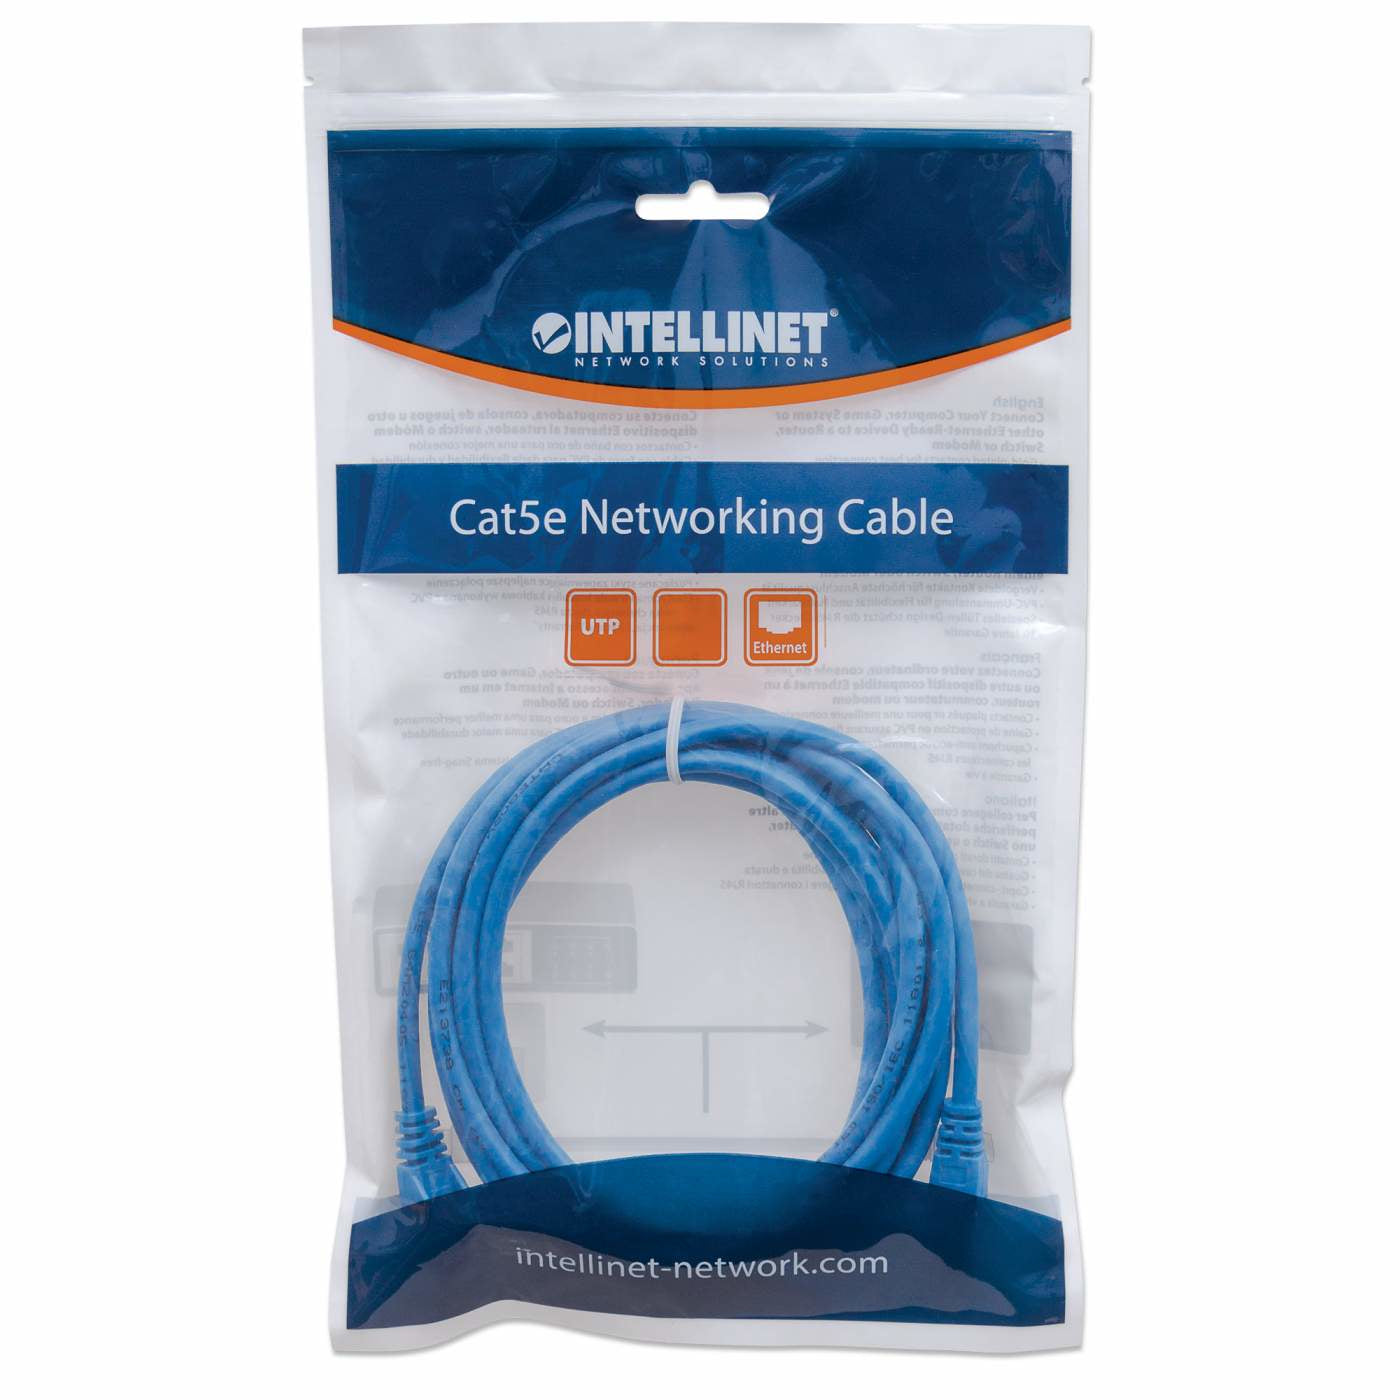 IC INTRACOM CABLE DE RED PATCH CAT6 CABL RJ45 7.6M AZUL